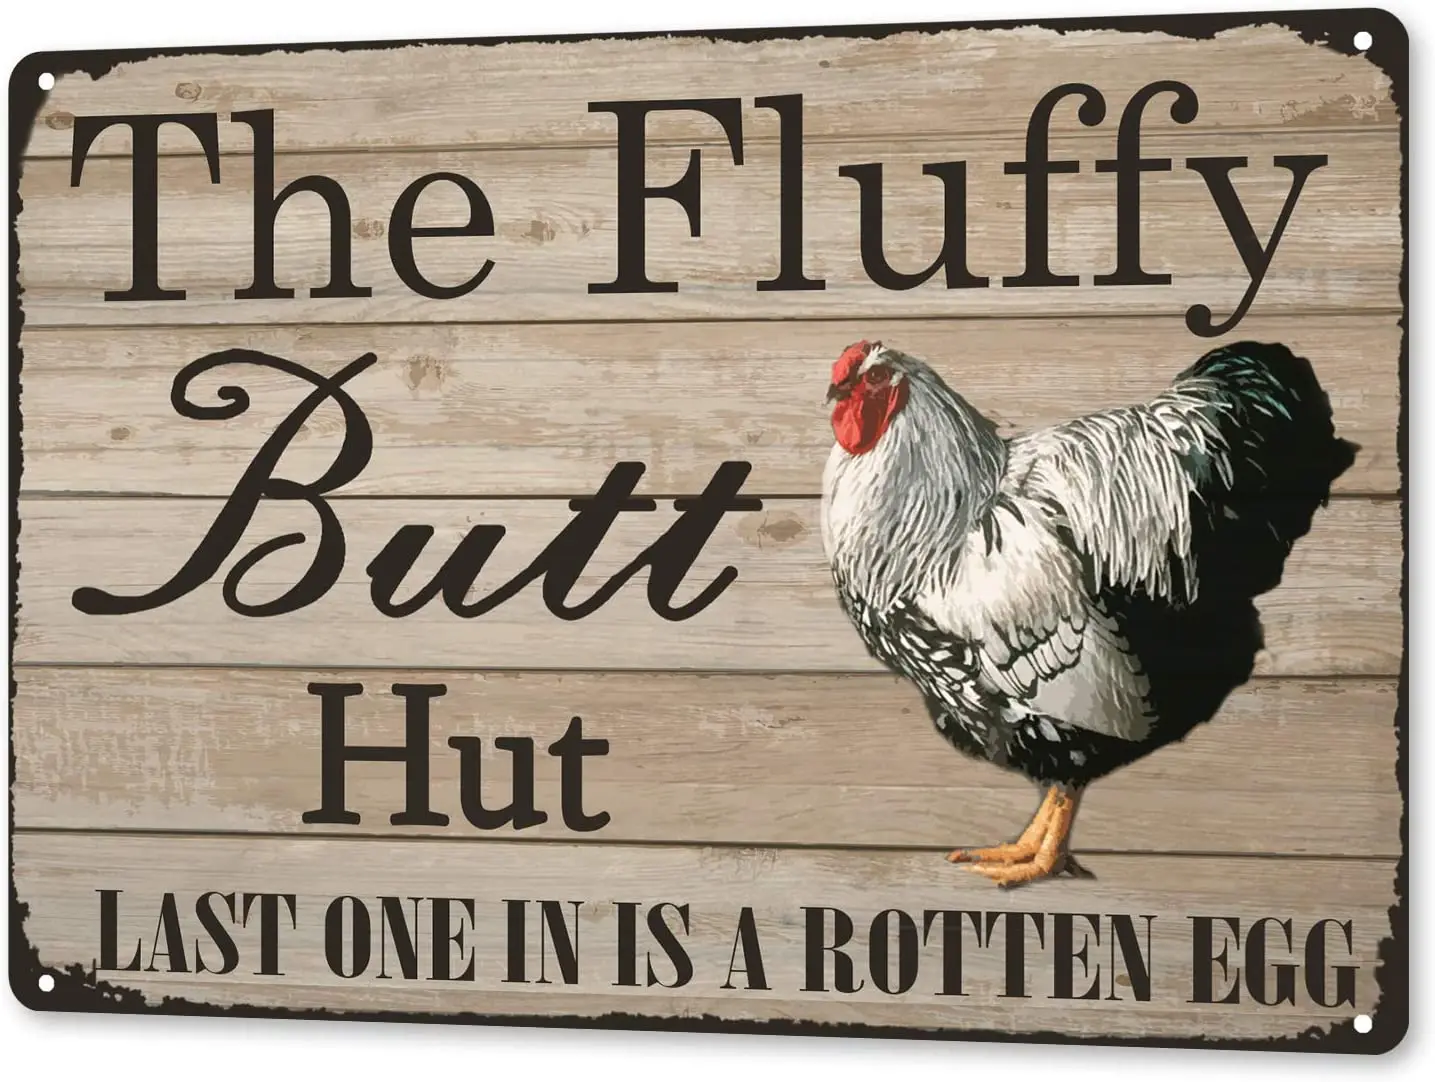 

Funny Chicken Coop Sign The Fluffy Butt Hut Last One in is A Egg Tin Sign Vintage Cave Kitchen Barn Coop Wall Decoration Sign